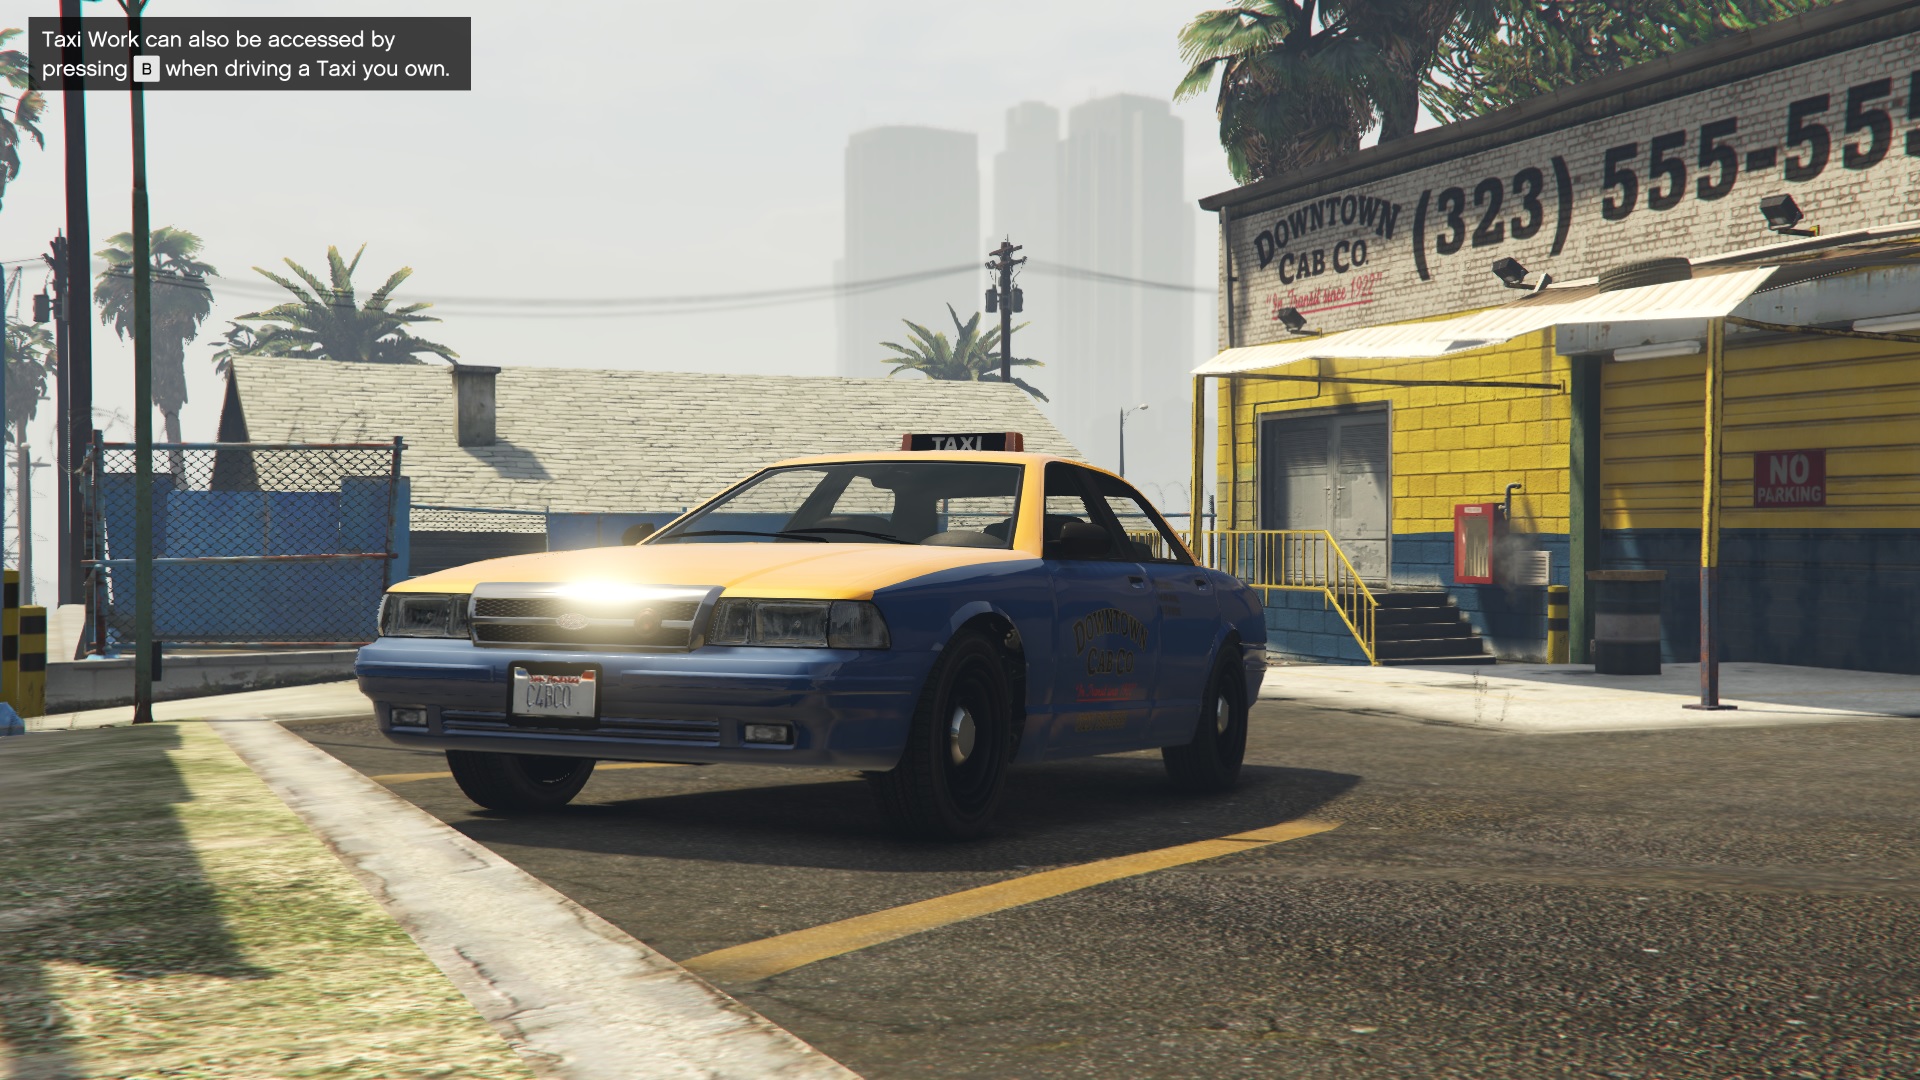 You can purchase your own taxi and use it for your taxi business in GTA 5. 